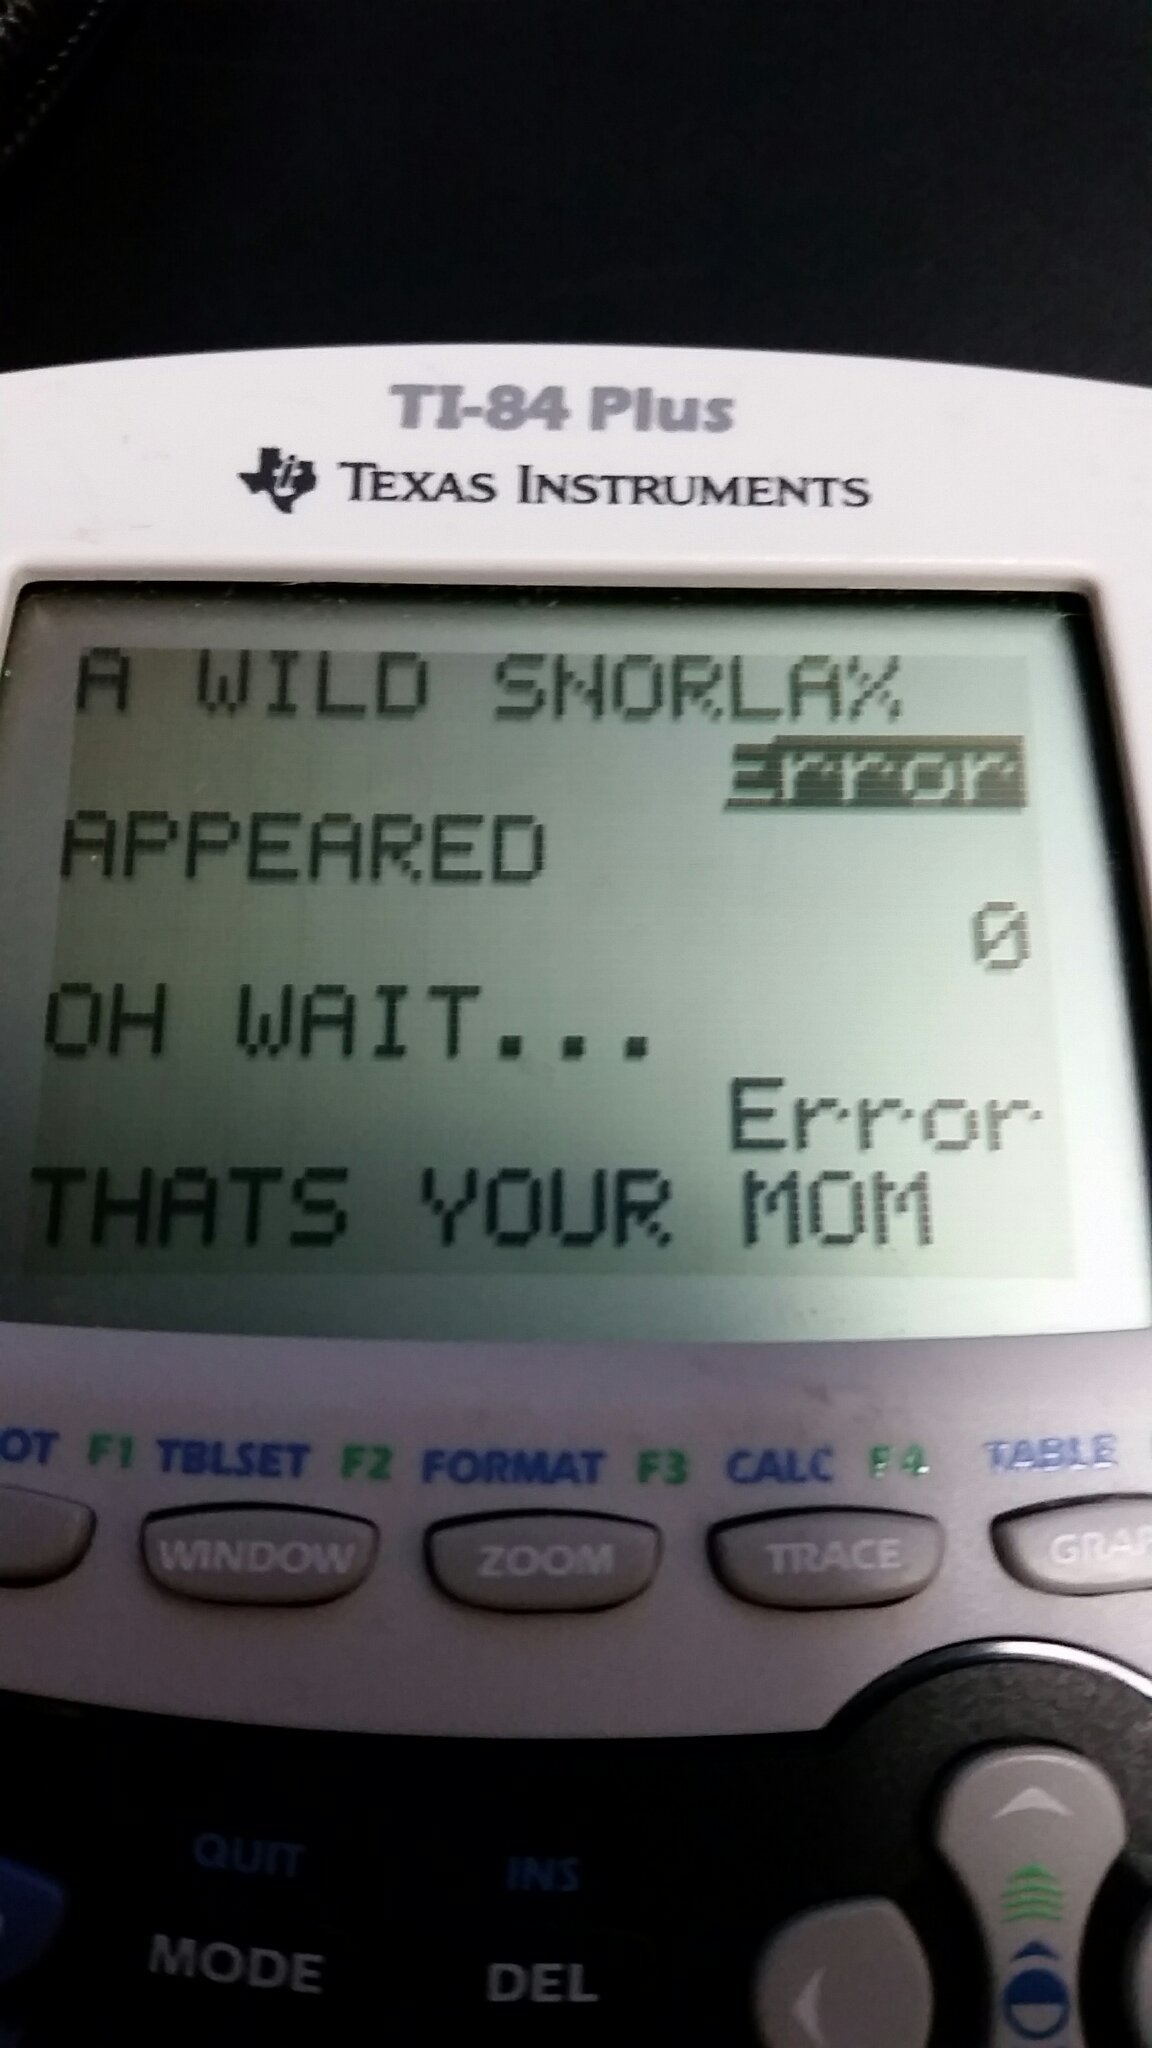 Found this on a calculator during class - meme